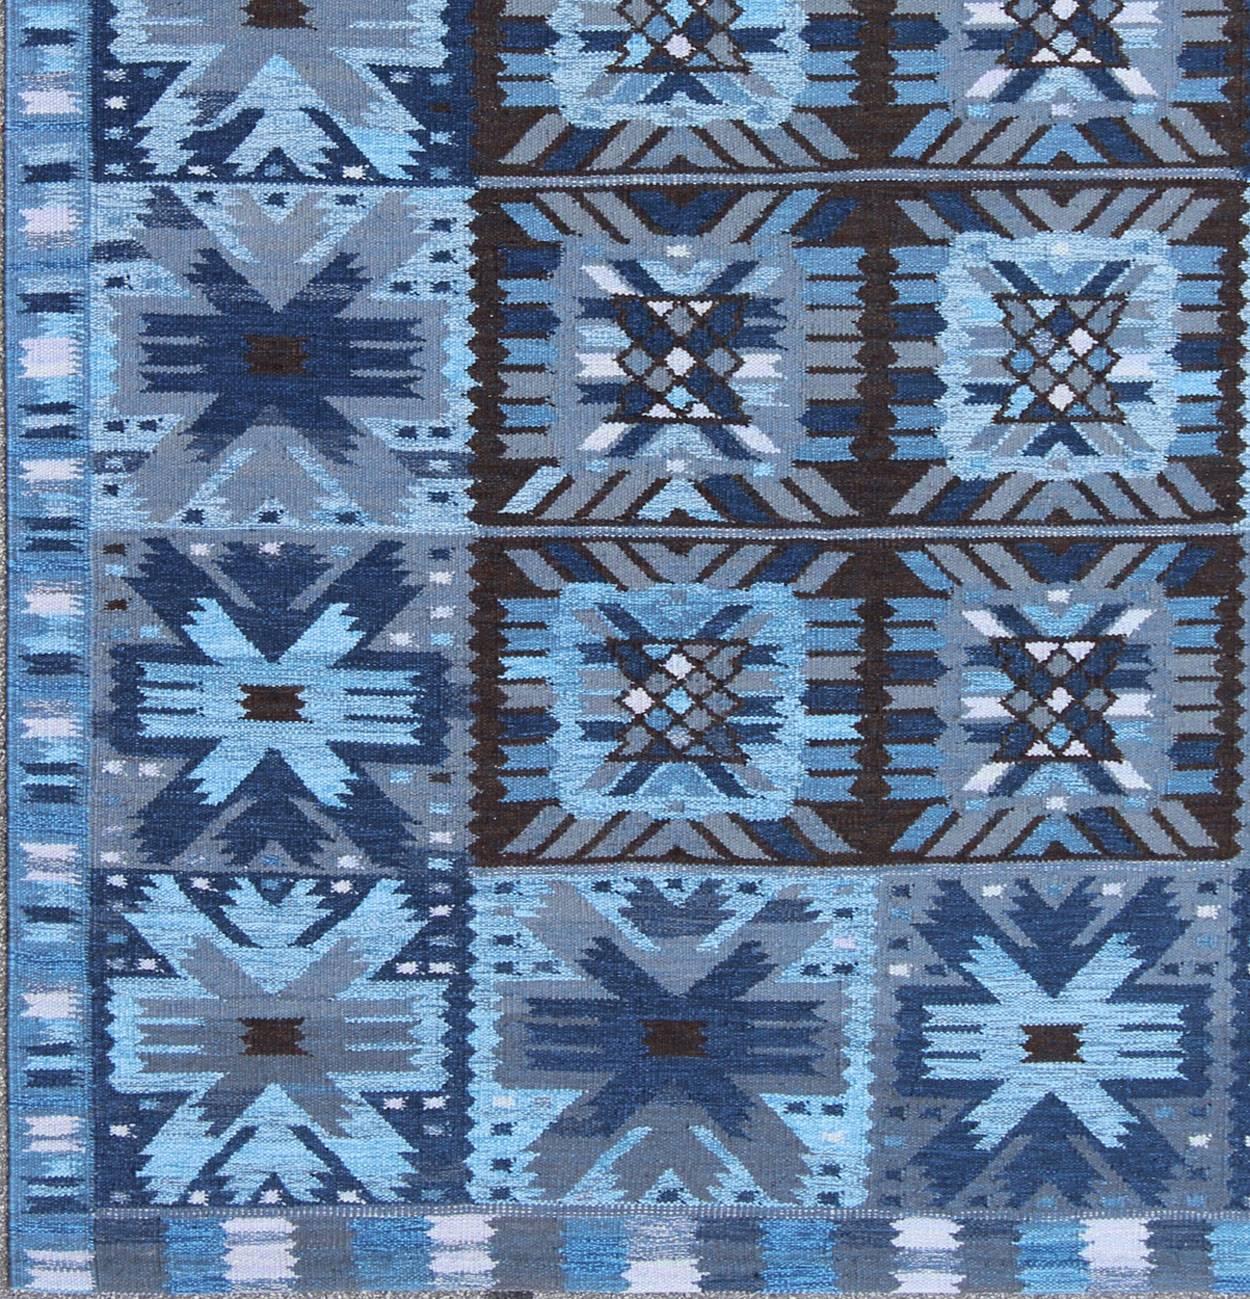  Keivan Woven Arts Contemporary Scandinavian Flat-Weave Swedish Design Rug in Blue & Brown Colors. This rug can be customized.

Measures: 9' x 12'.

This modern Scandinavian design flat-weave rug is inspired by the work of Swedish textile designers